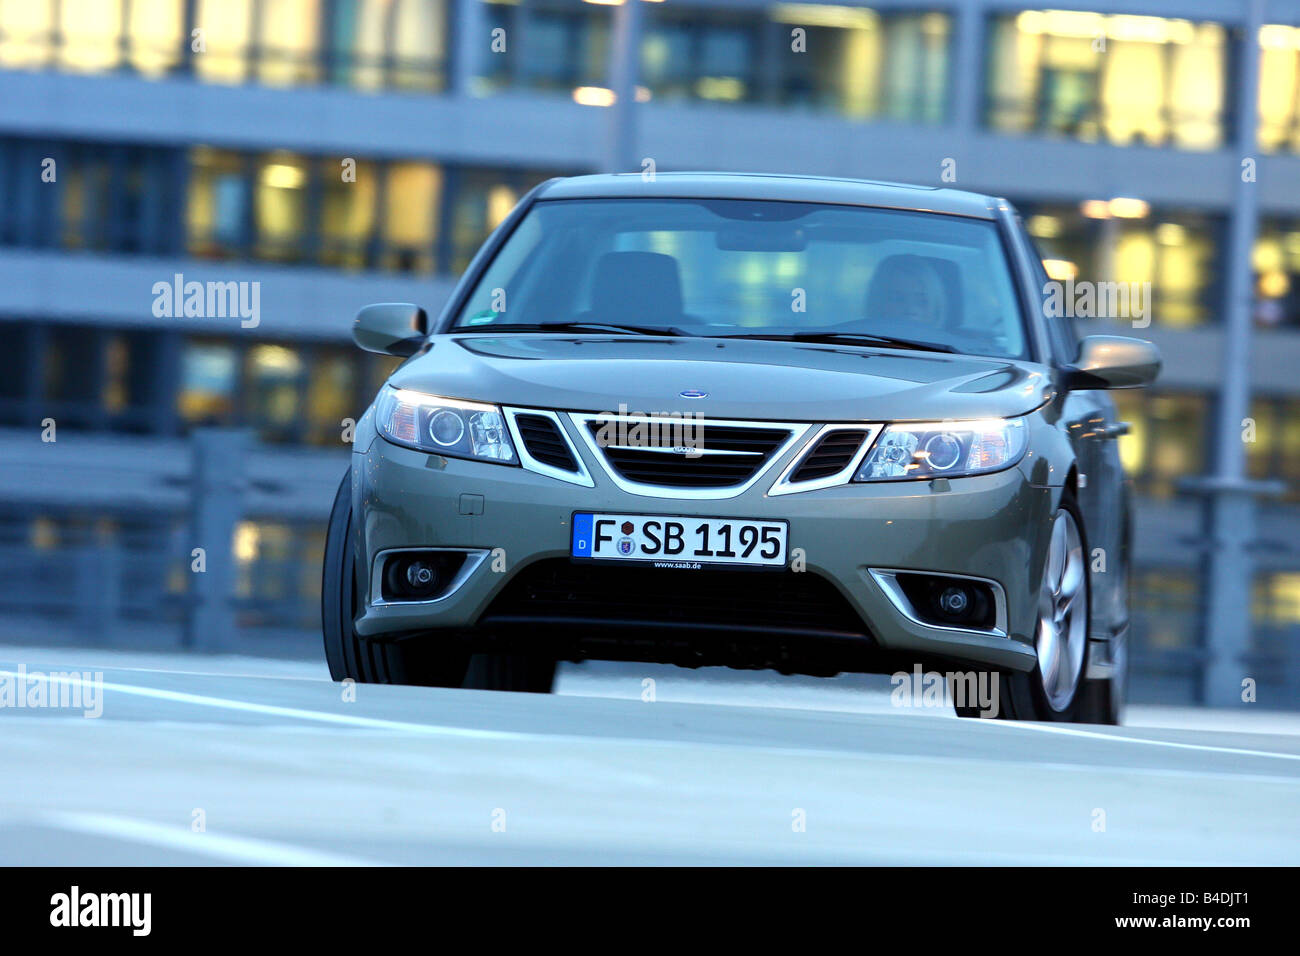 Saab 9-3 2.8 Turbo V6 Aero, model year 2007-, driving, diagonal from the front, frontal view, City Stock Photo